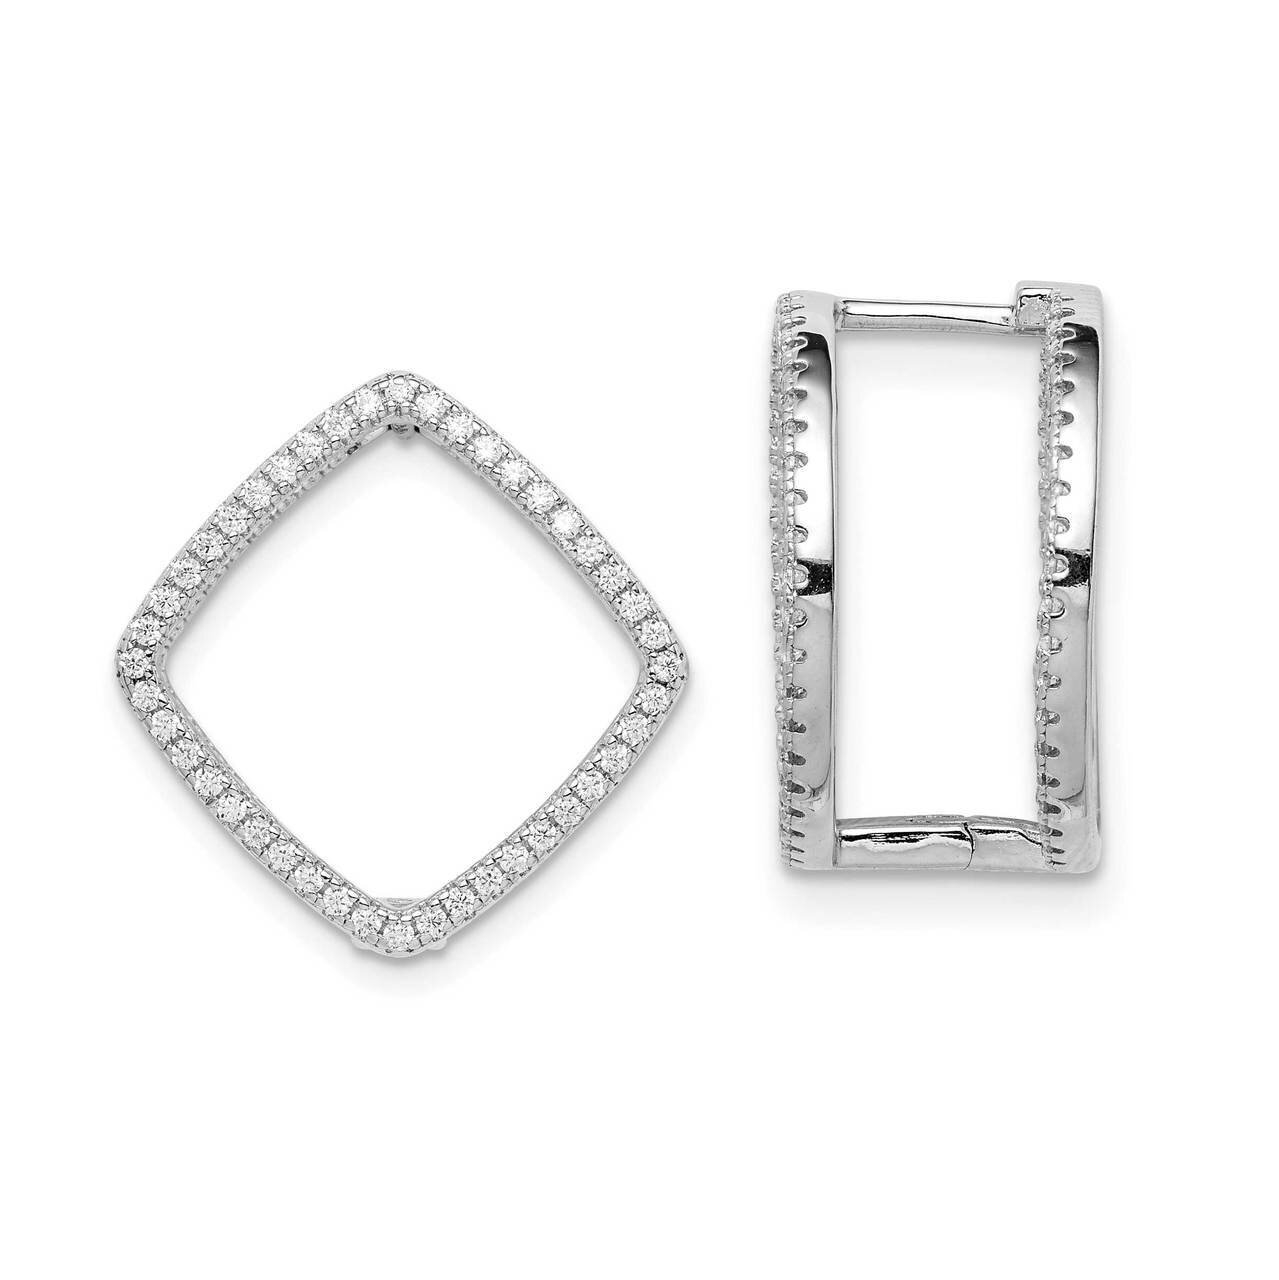 Square Hinged In & Out Earrings Sterling Silver Rhodium-plated CZ Diamond QE15375